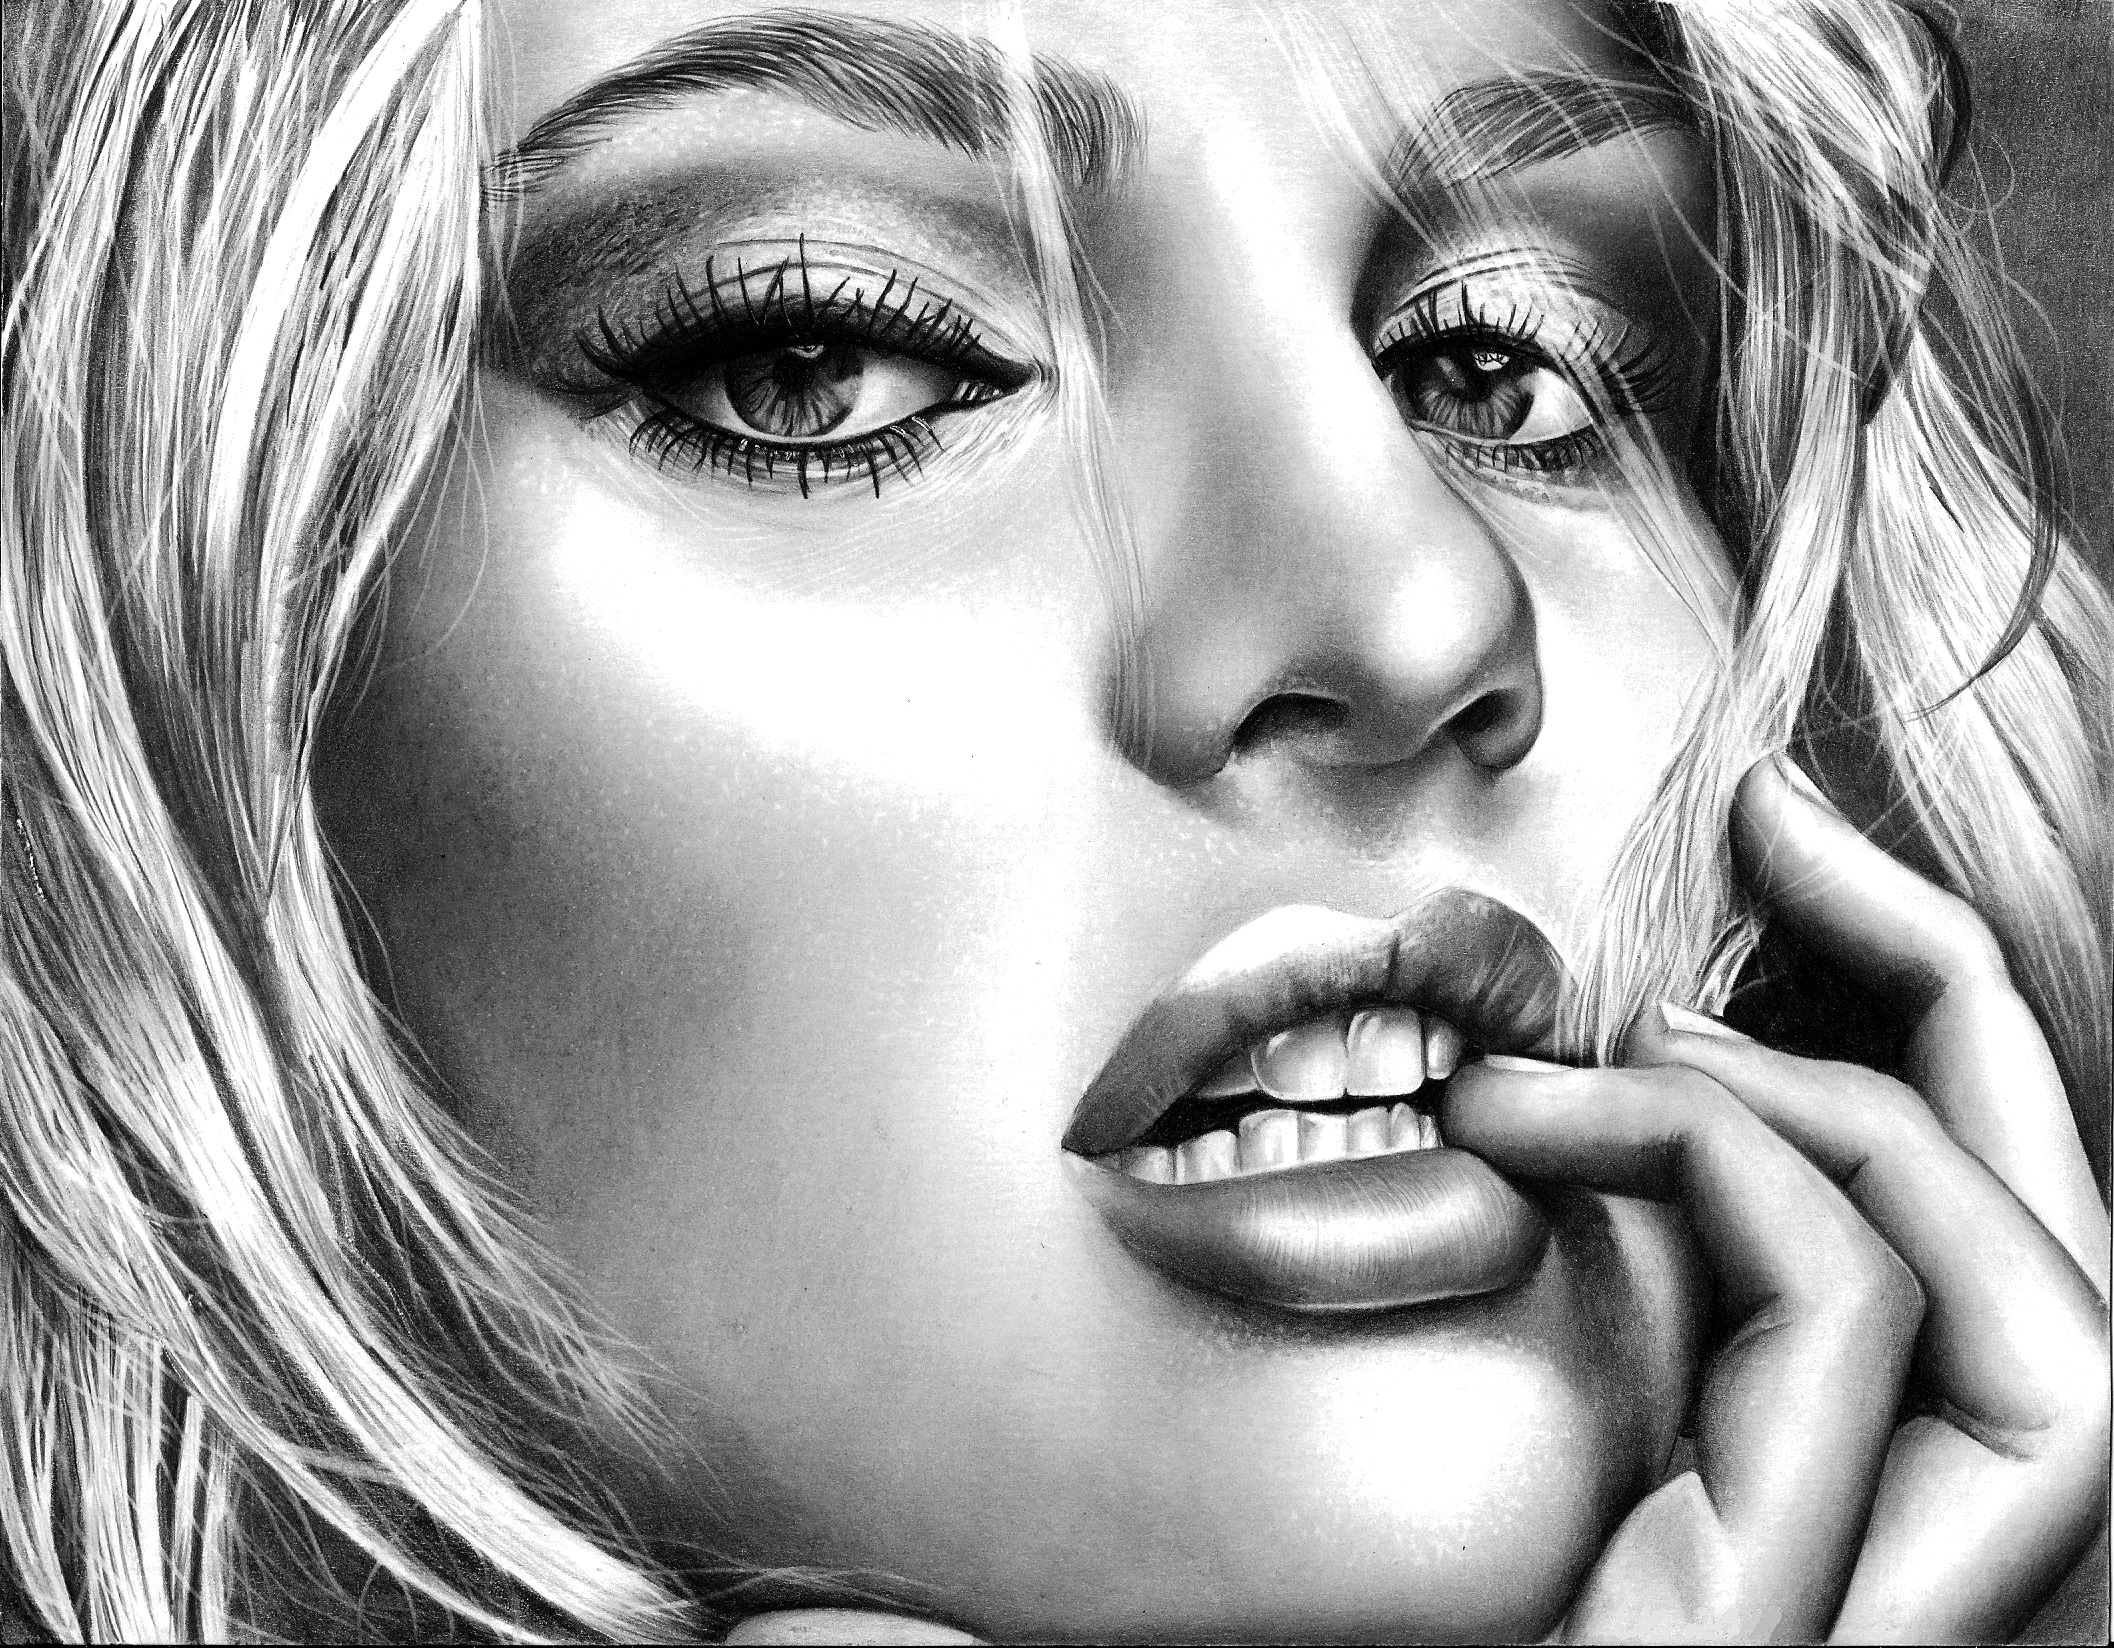 Painting of Candice Swanepoel